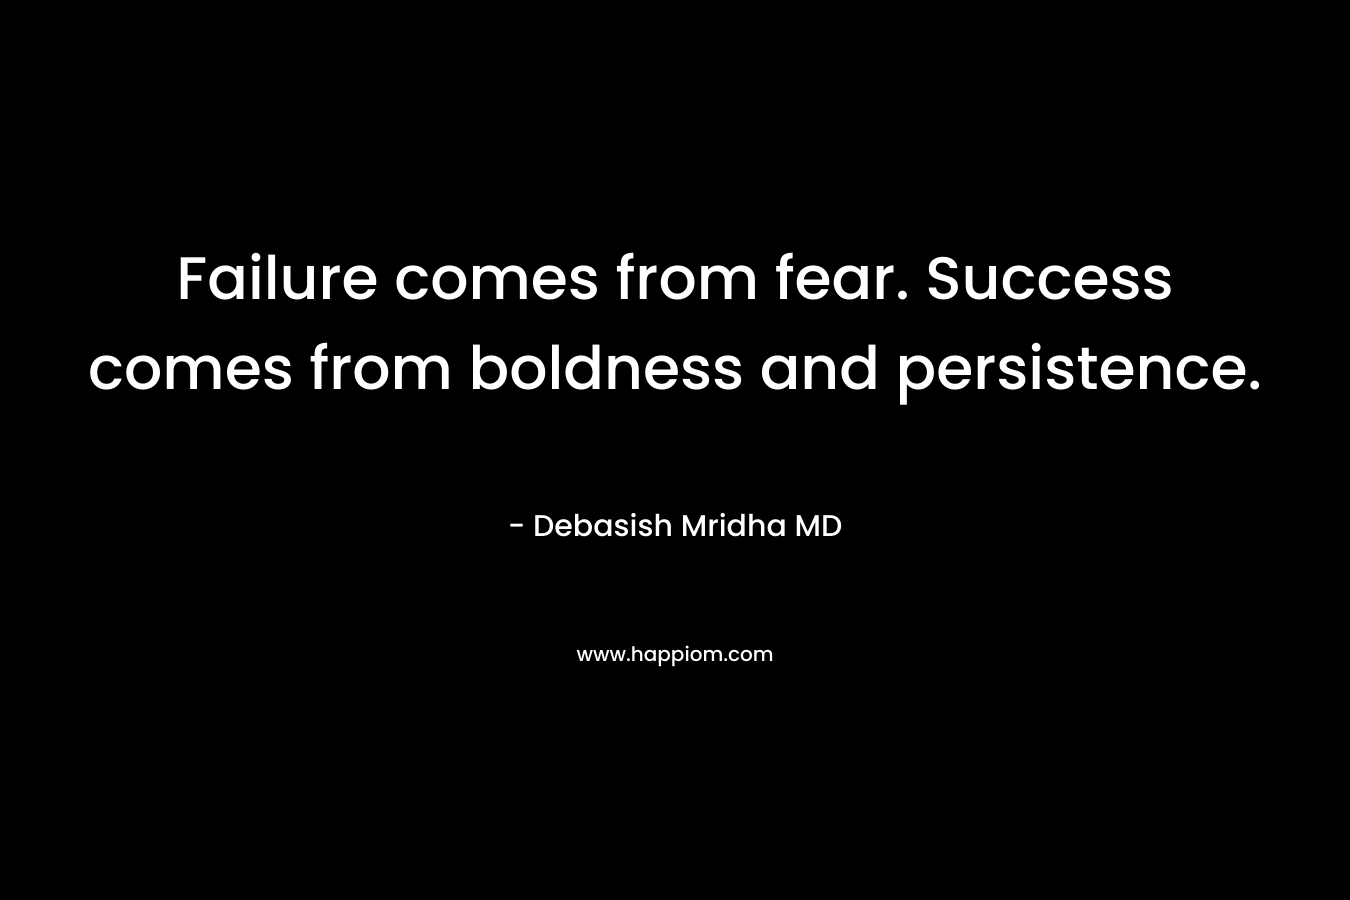 Failure comes from fear. Success comes from boldness and persistence. – Debasish Mridha MD